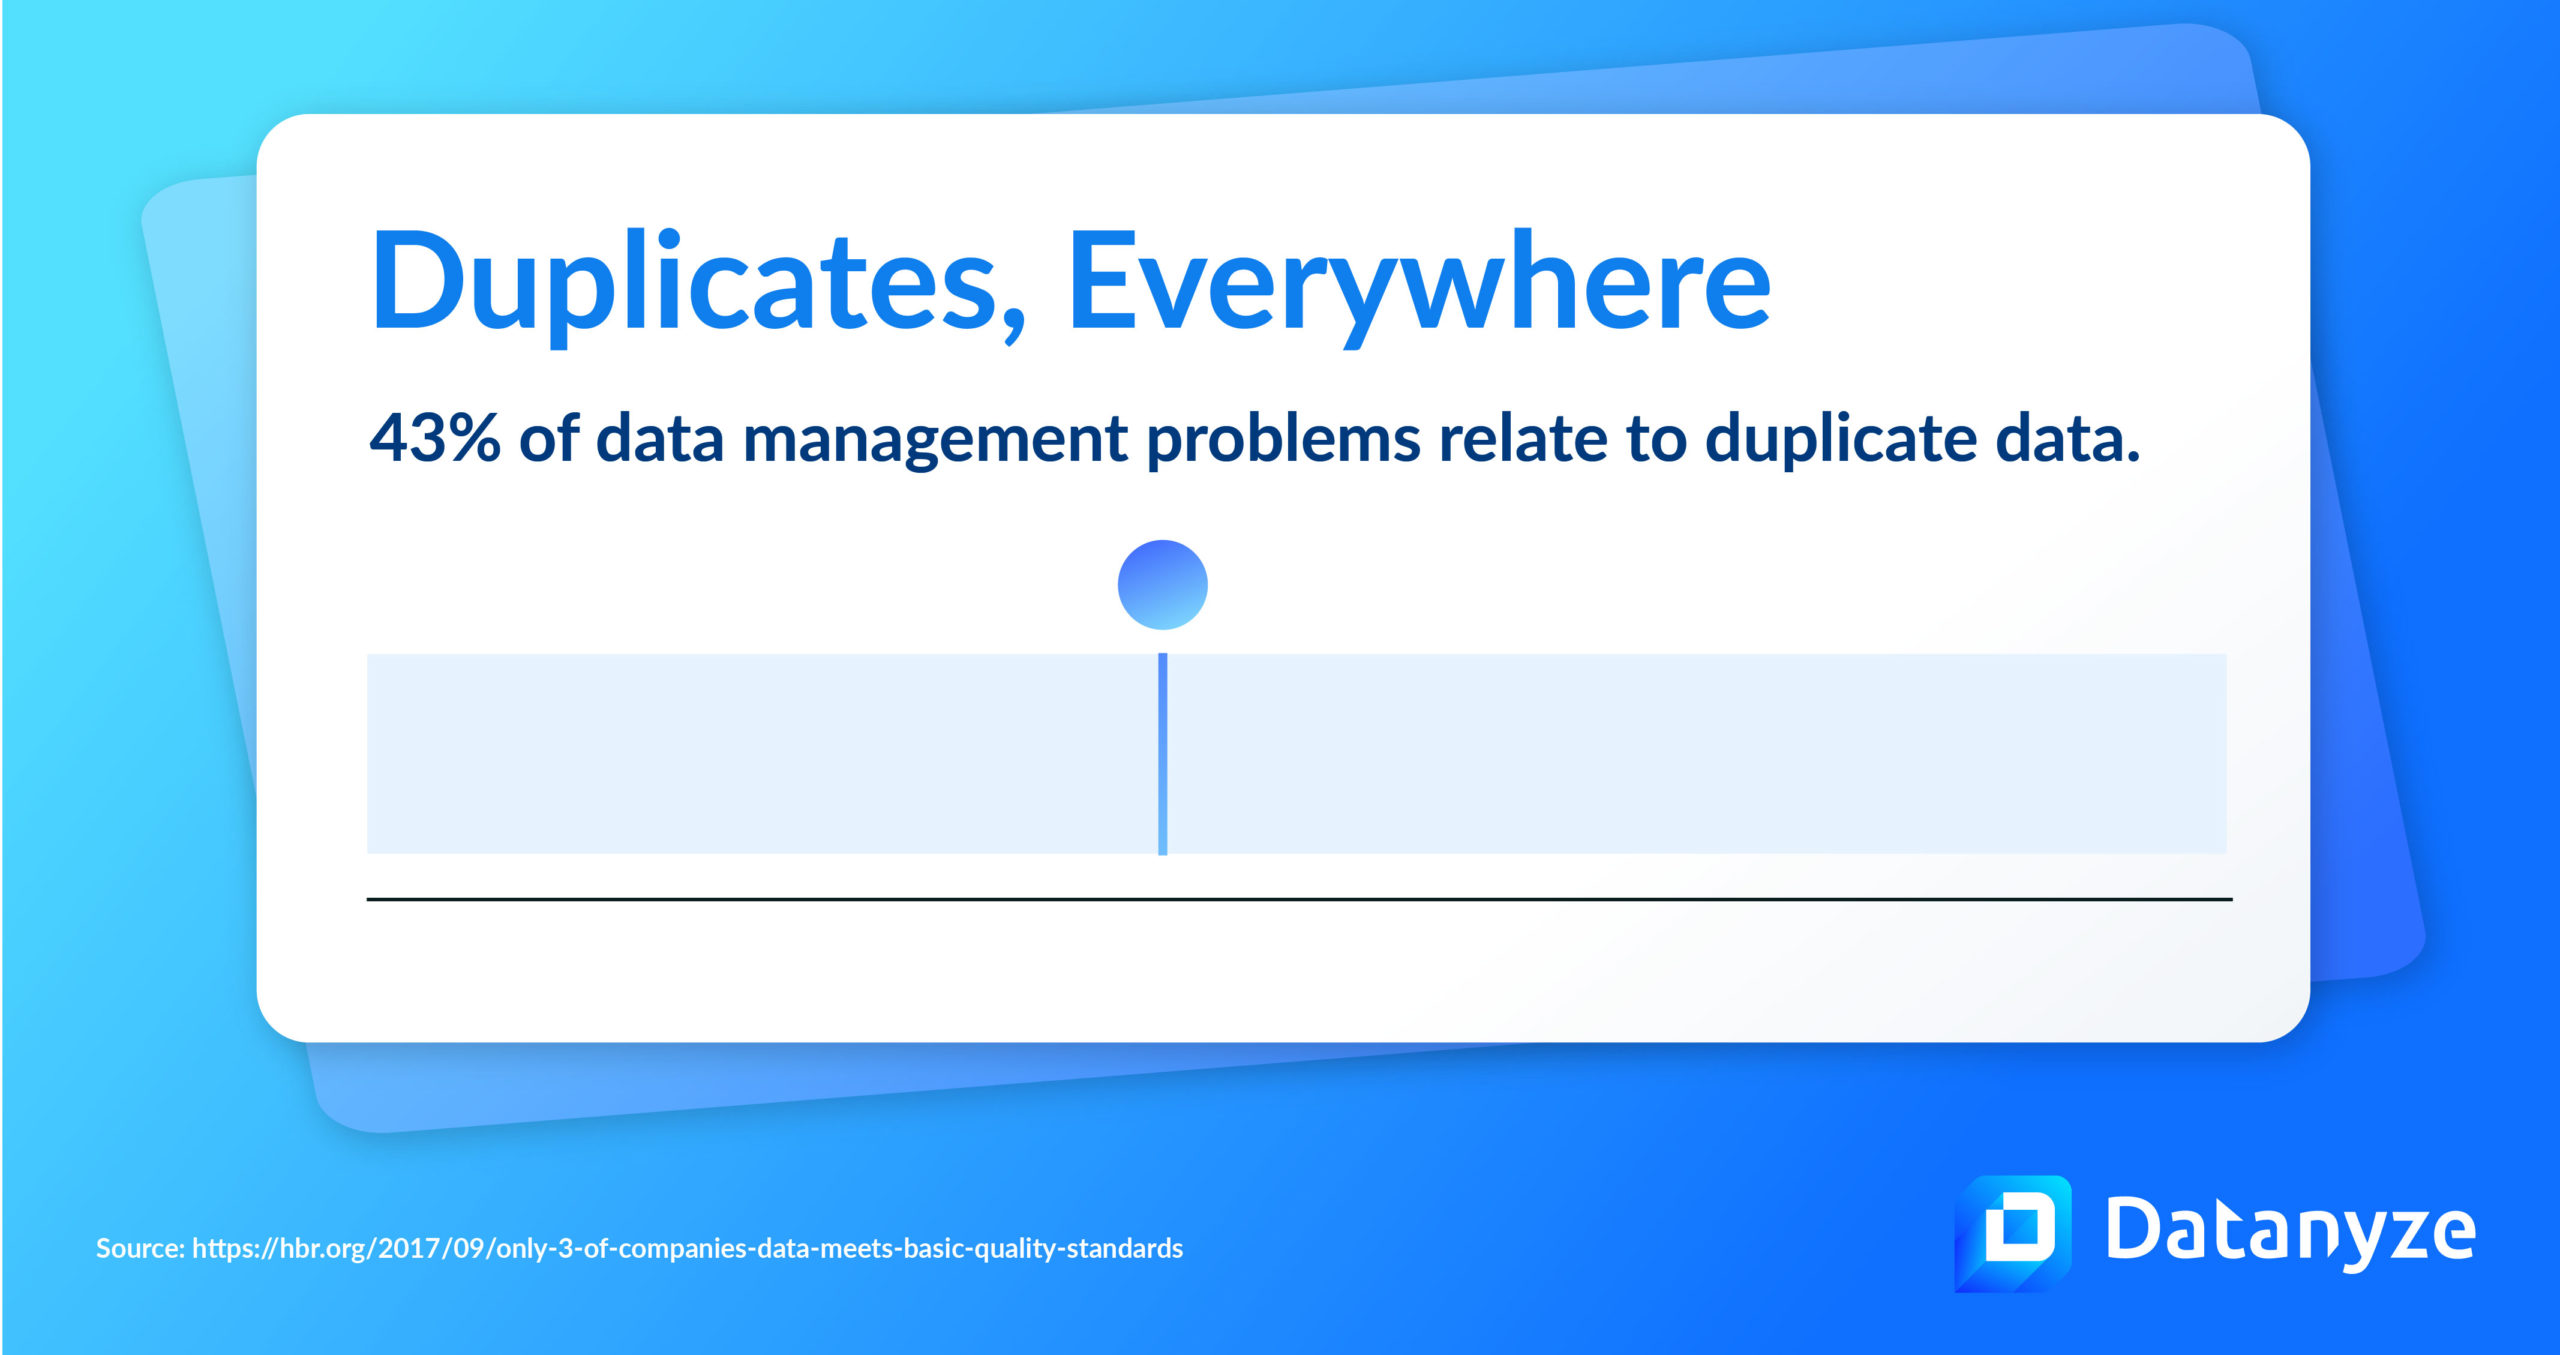 43% of data management problems relate to duplicate data